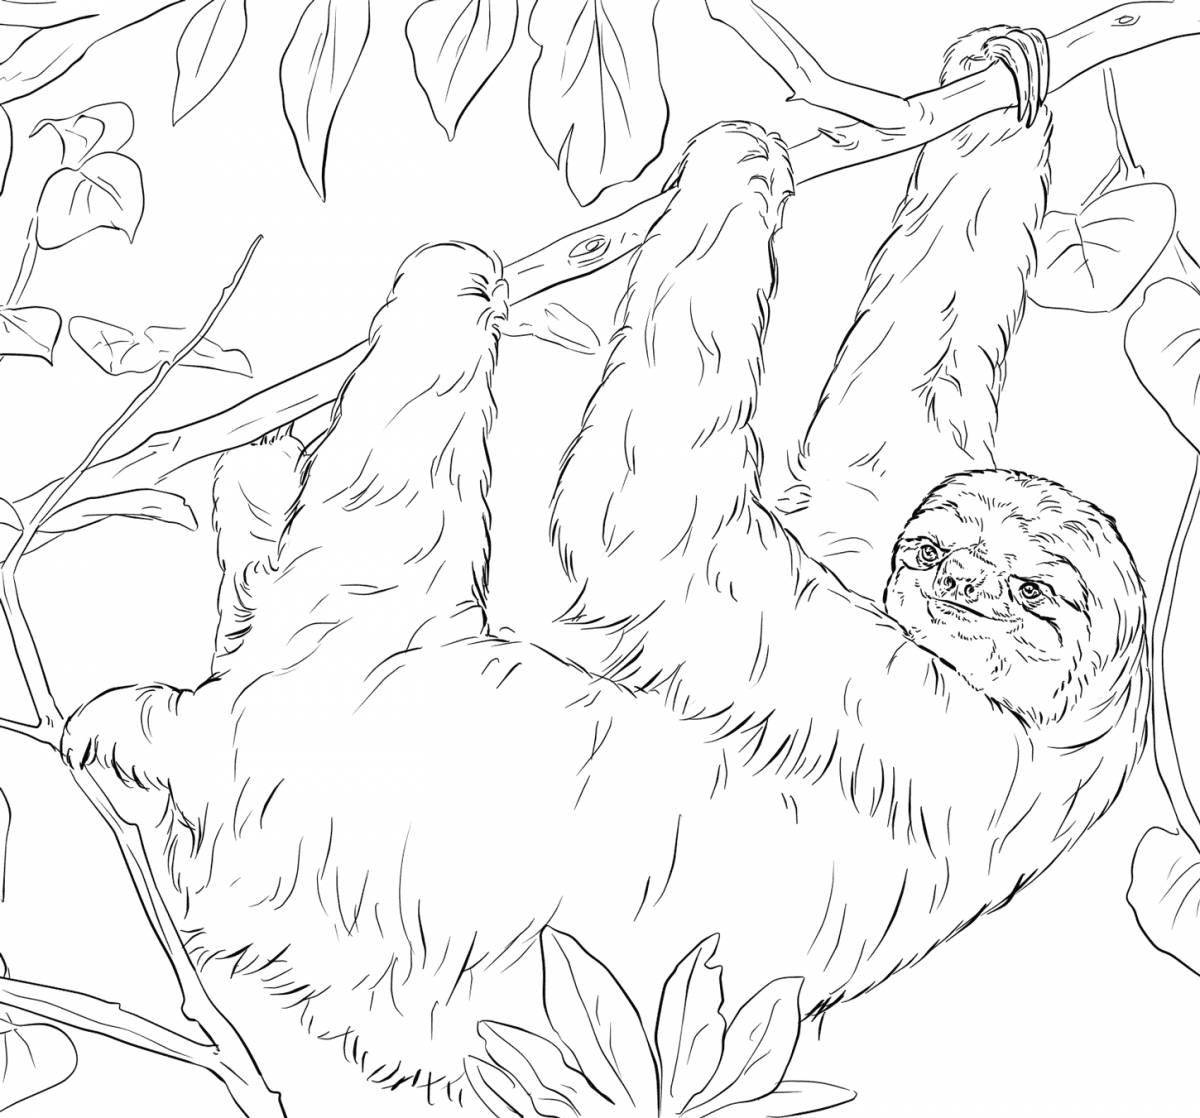 Playful coloring sloth